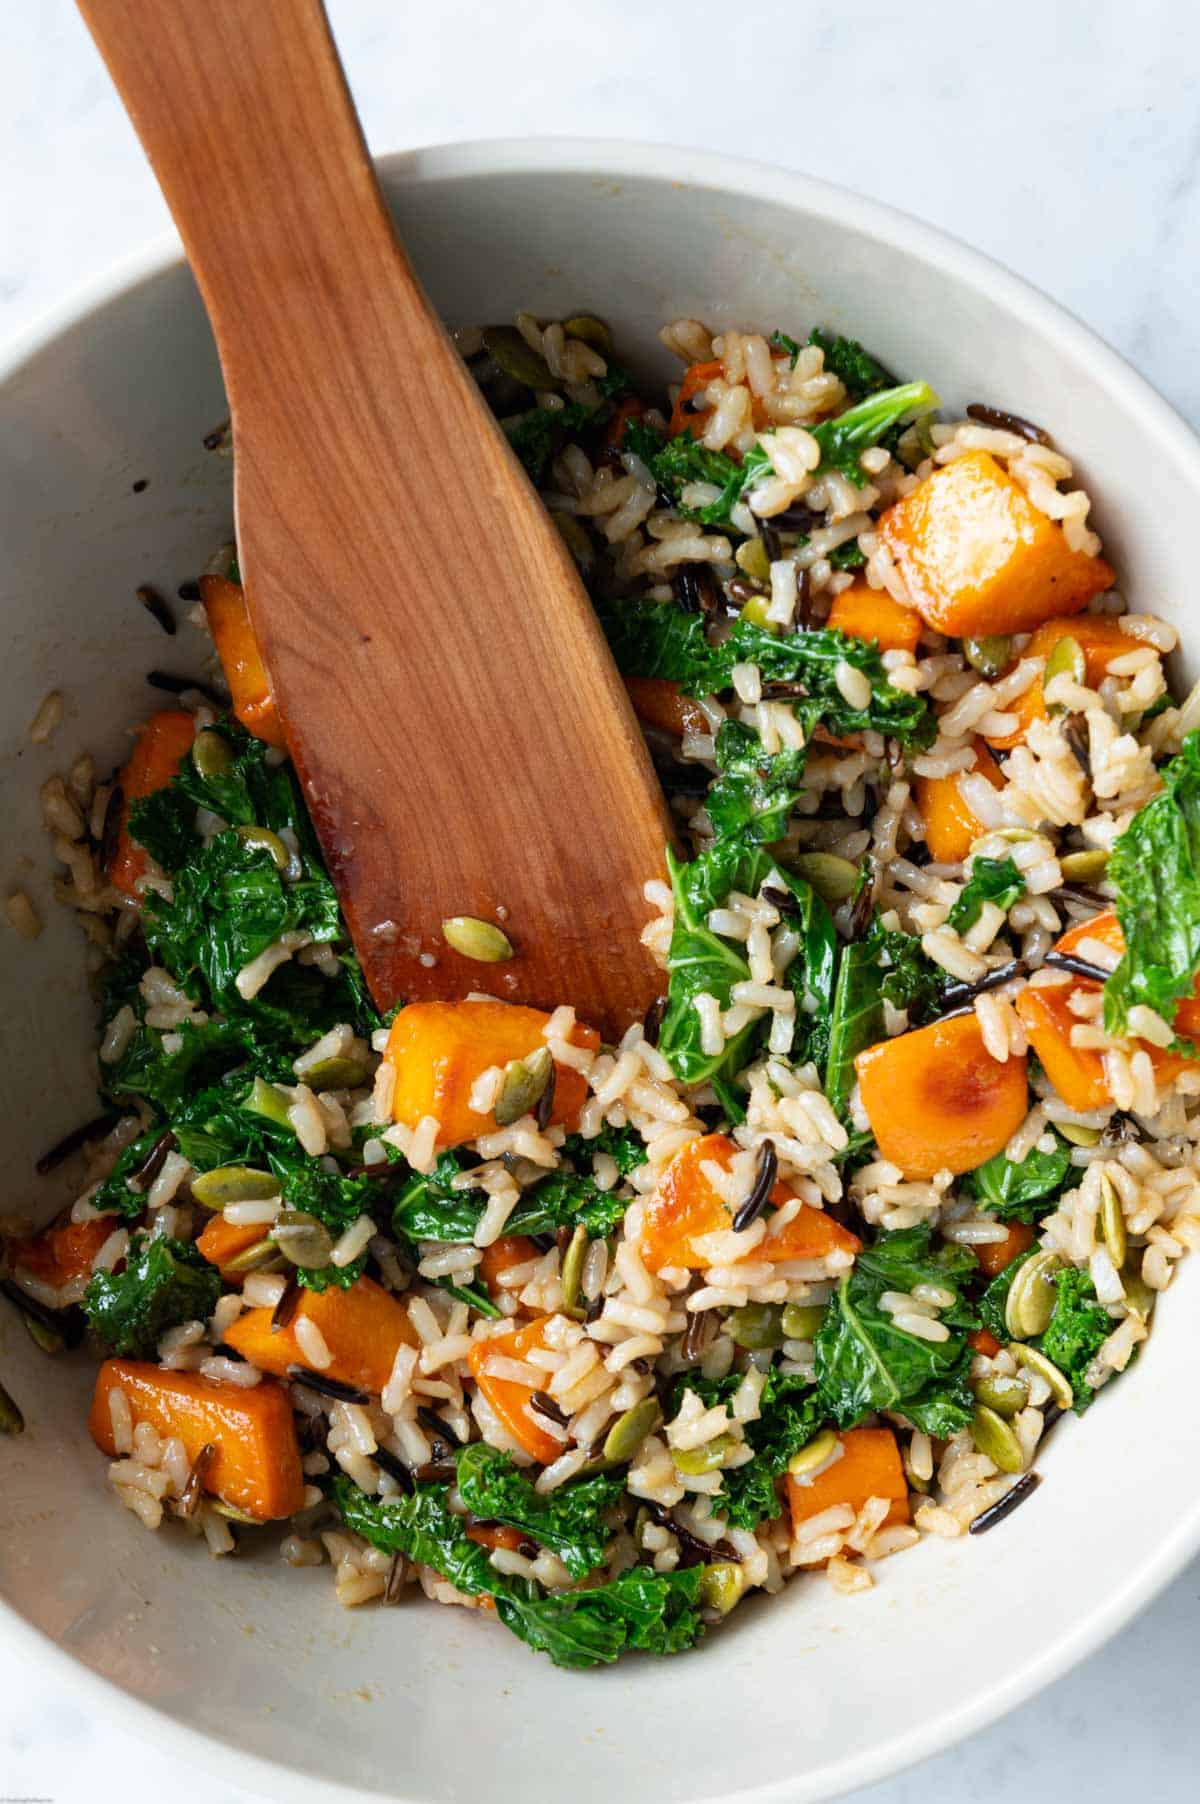 Sweet potato, kale, roasted pepitas, wild rice blend, and hemp hearts mixed with dressing in a white bowl with a wooden spatula.